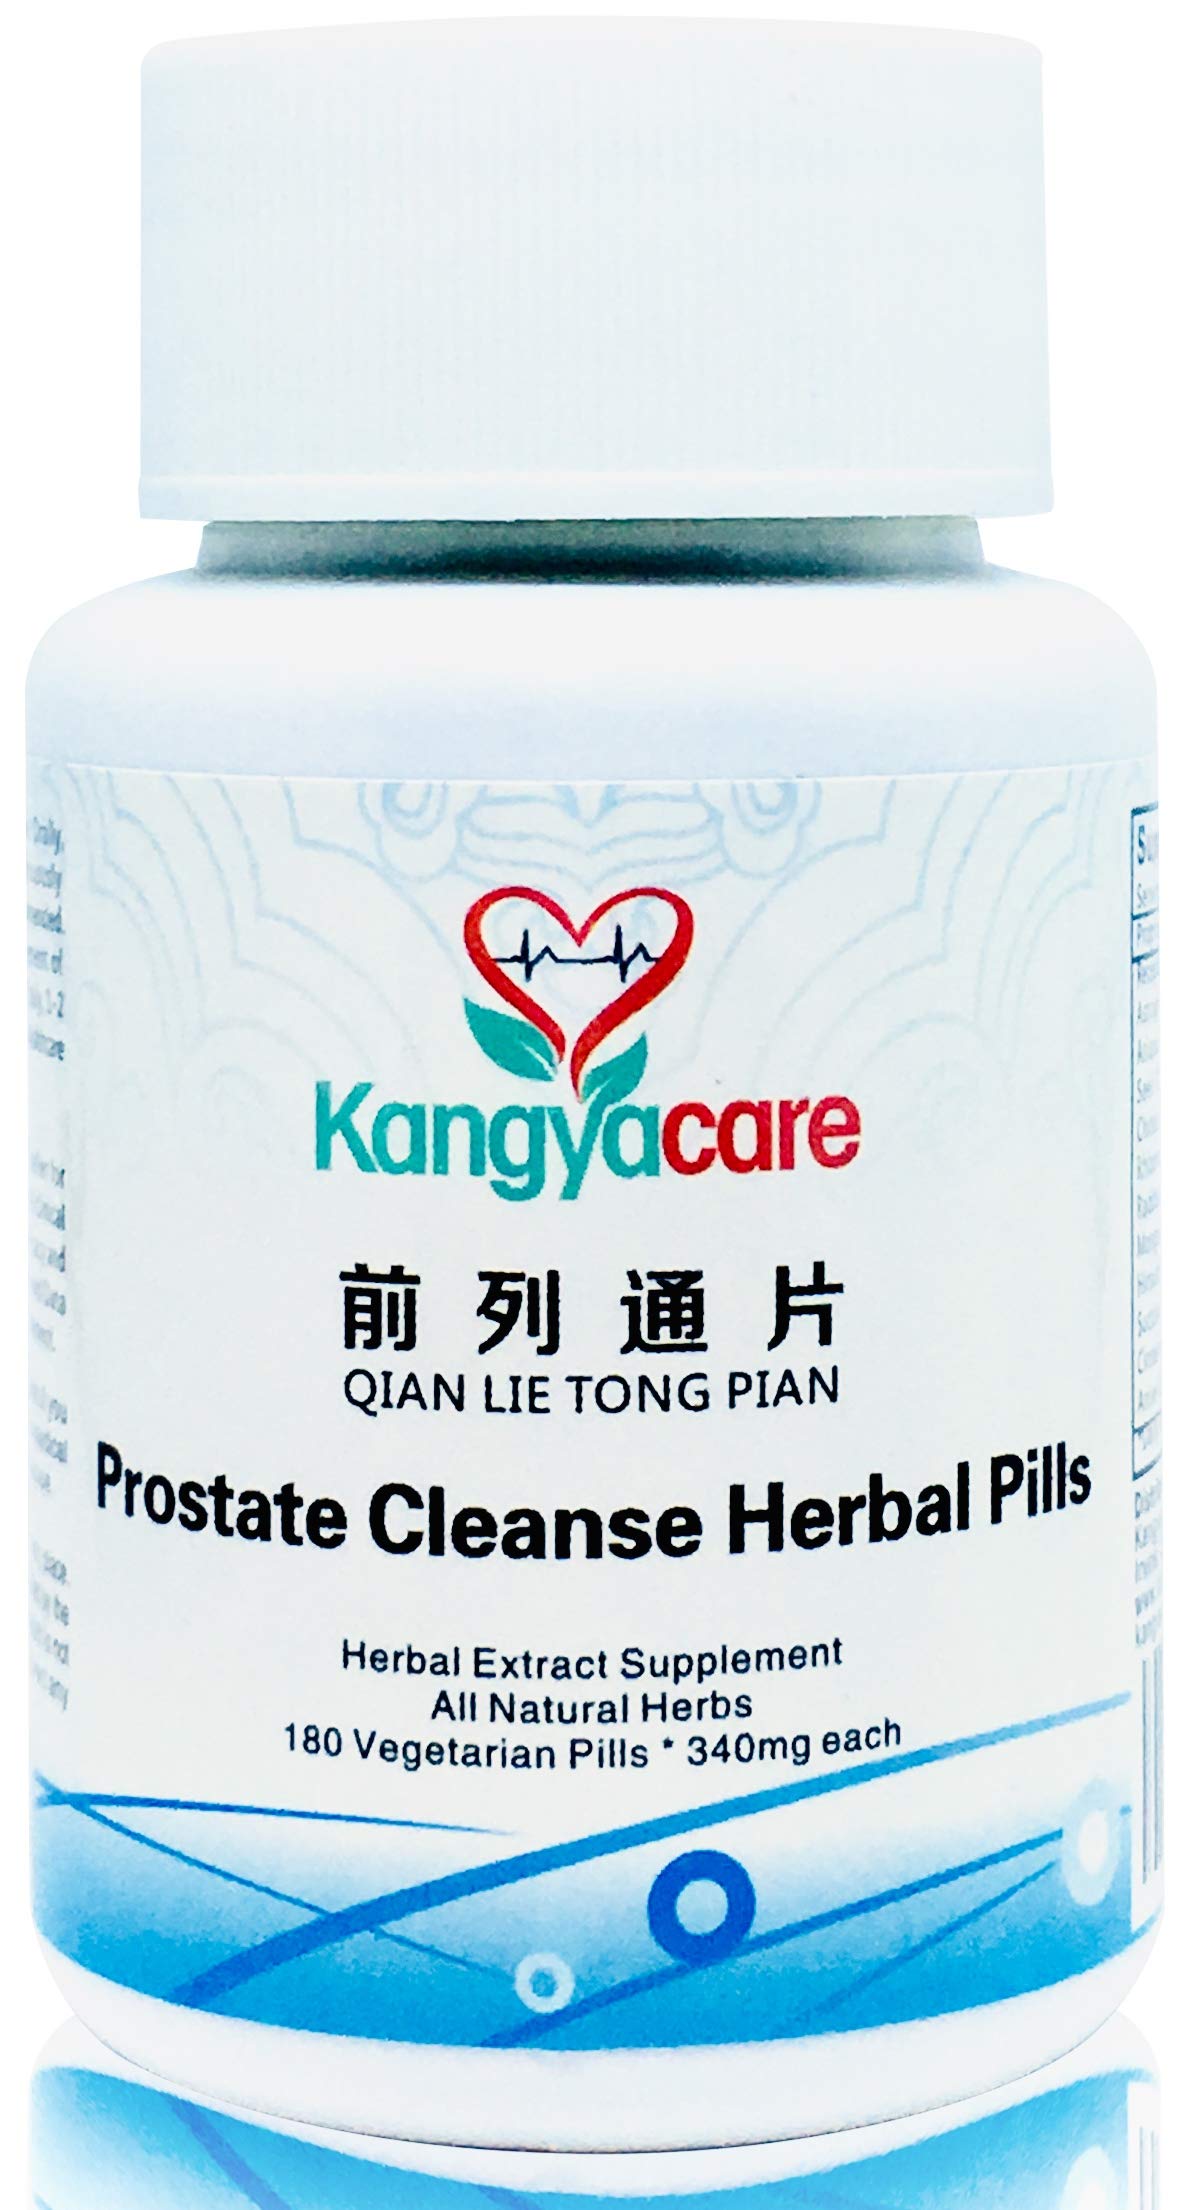 Kangyacare] Prostate Cleanse Herbal Pill (Qian Lie Tong Pian) - Reduce Prostate Discomfort & Inflammation - Help Frequent Urination -Improve Men’s Urinary Tract Health - 180 Ct/Bottle x 1 Bottle